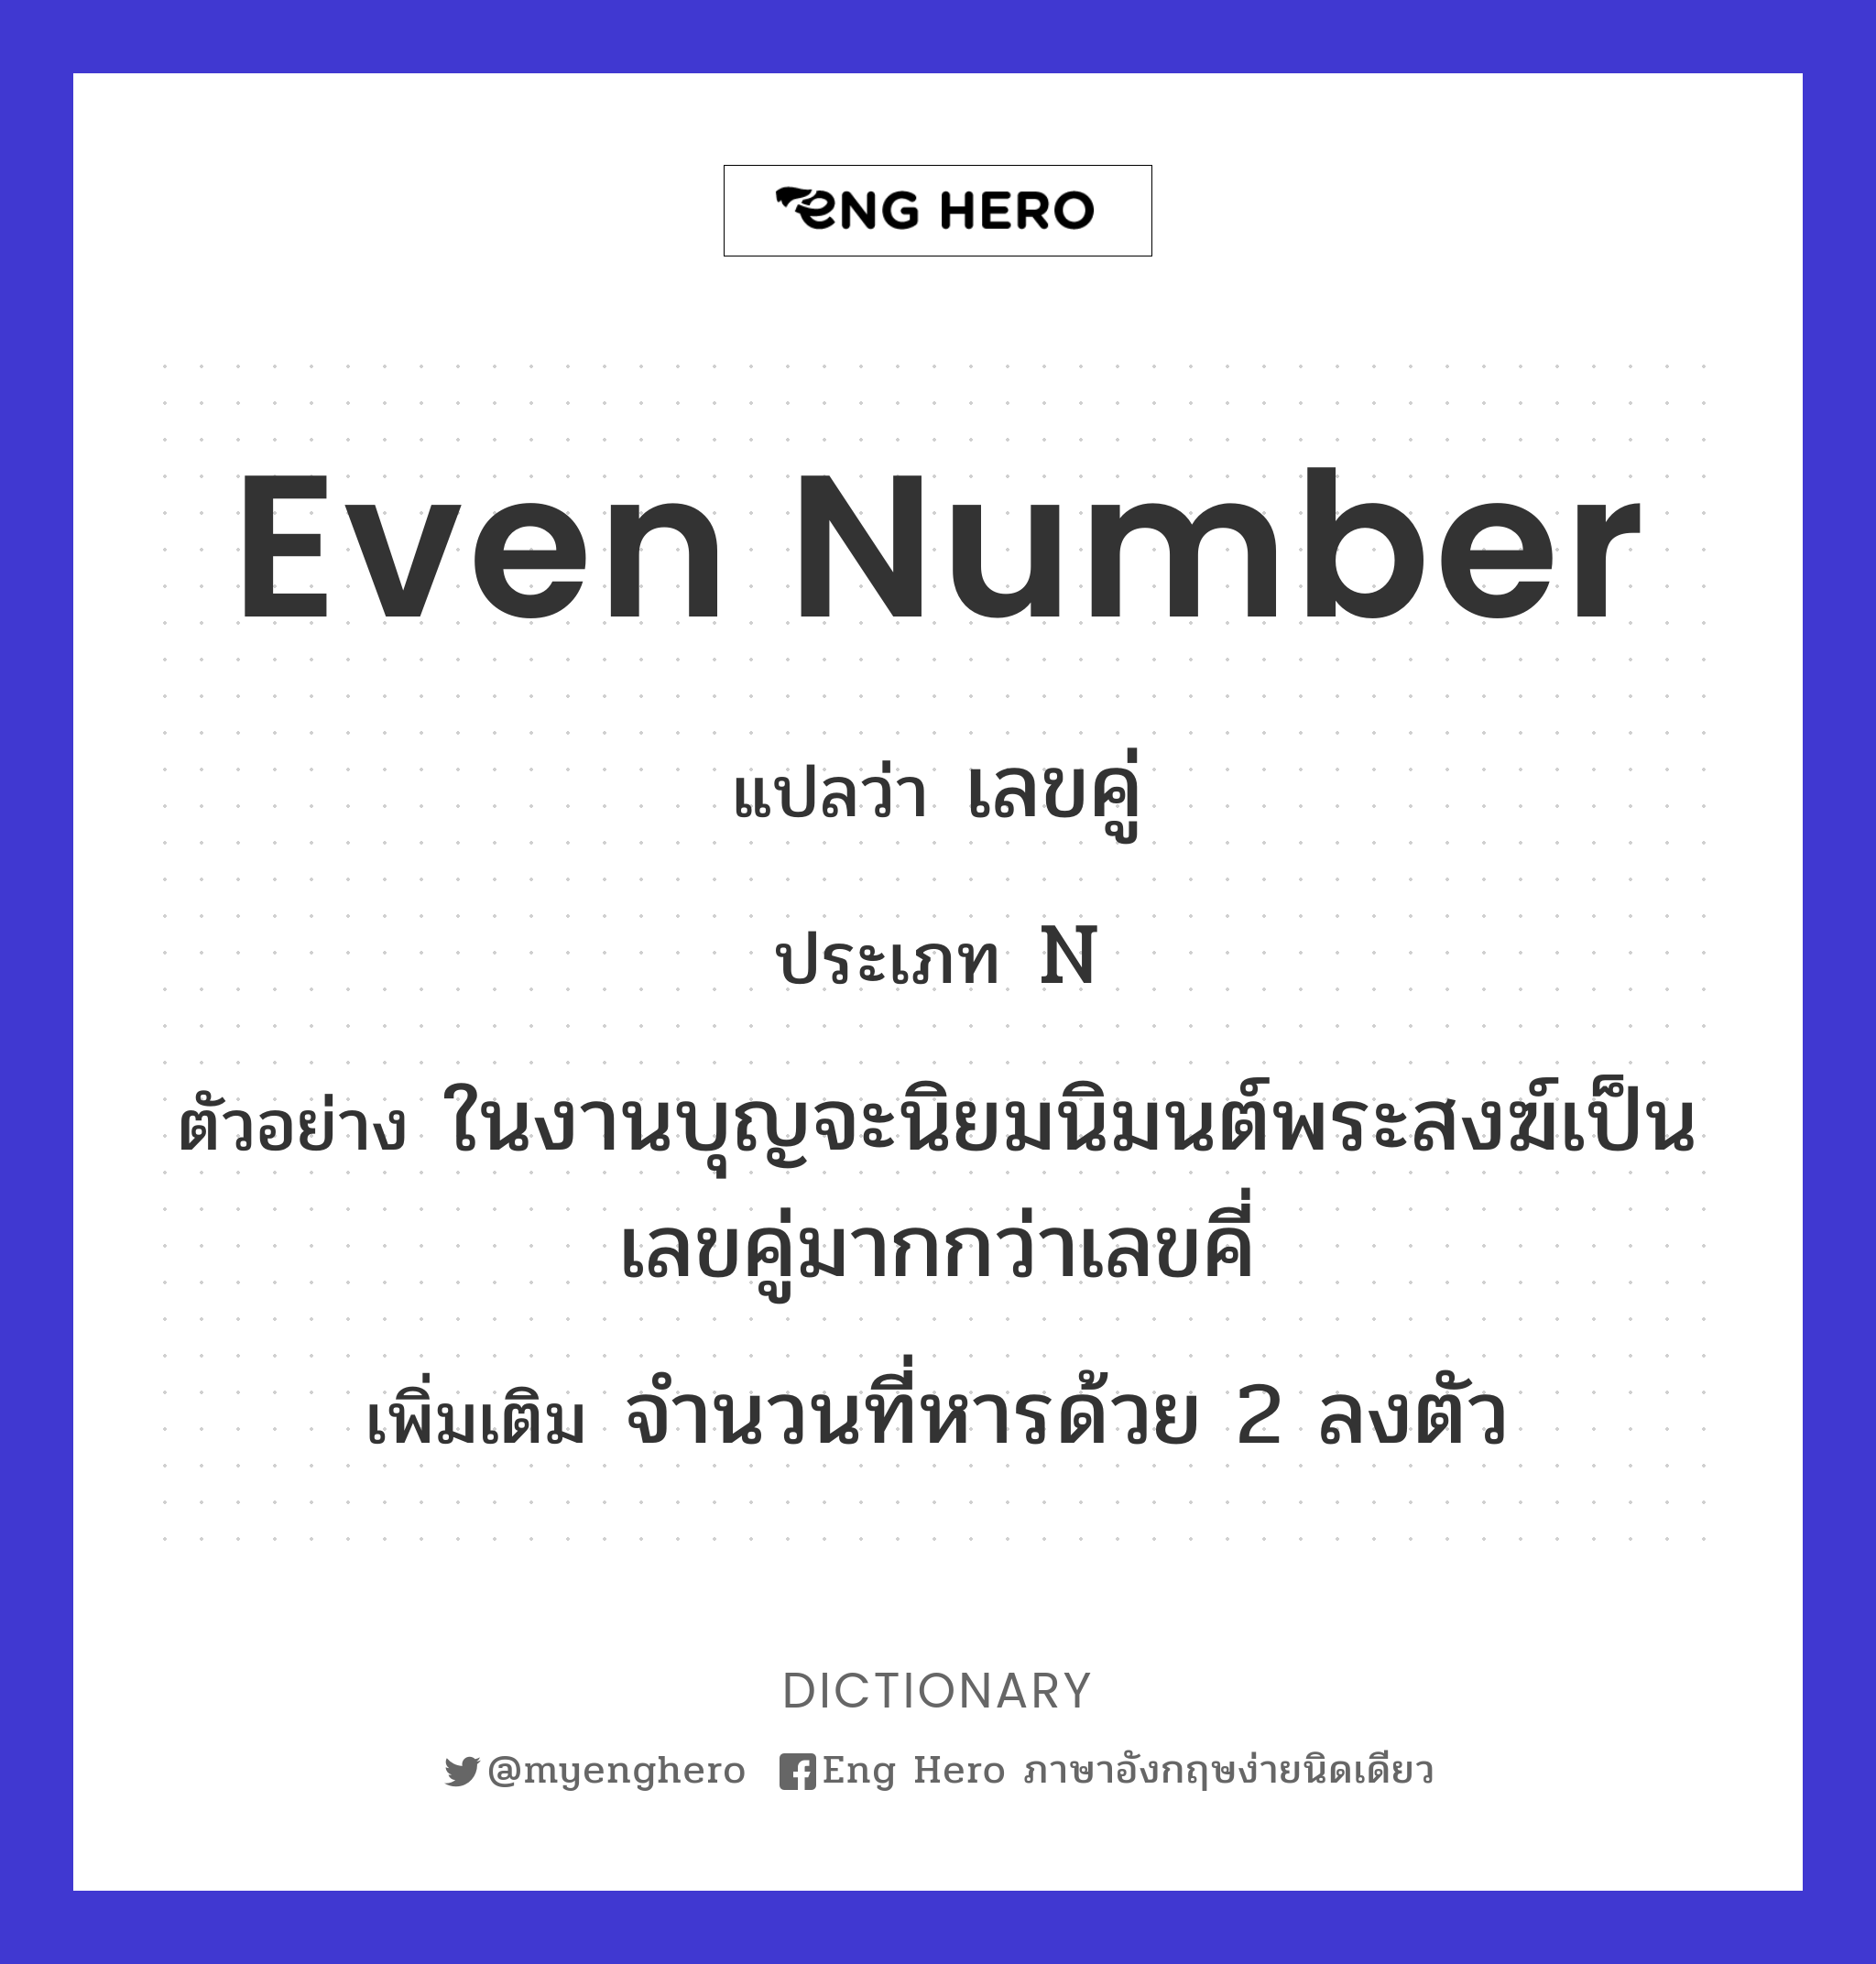 even number